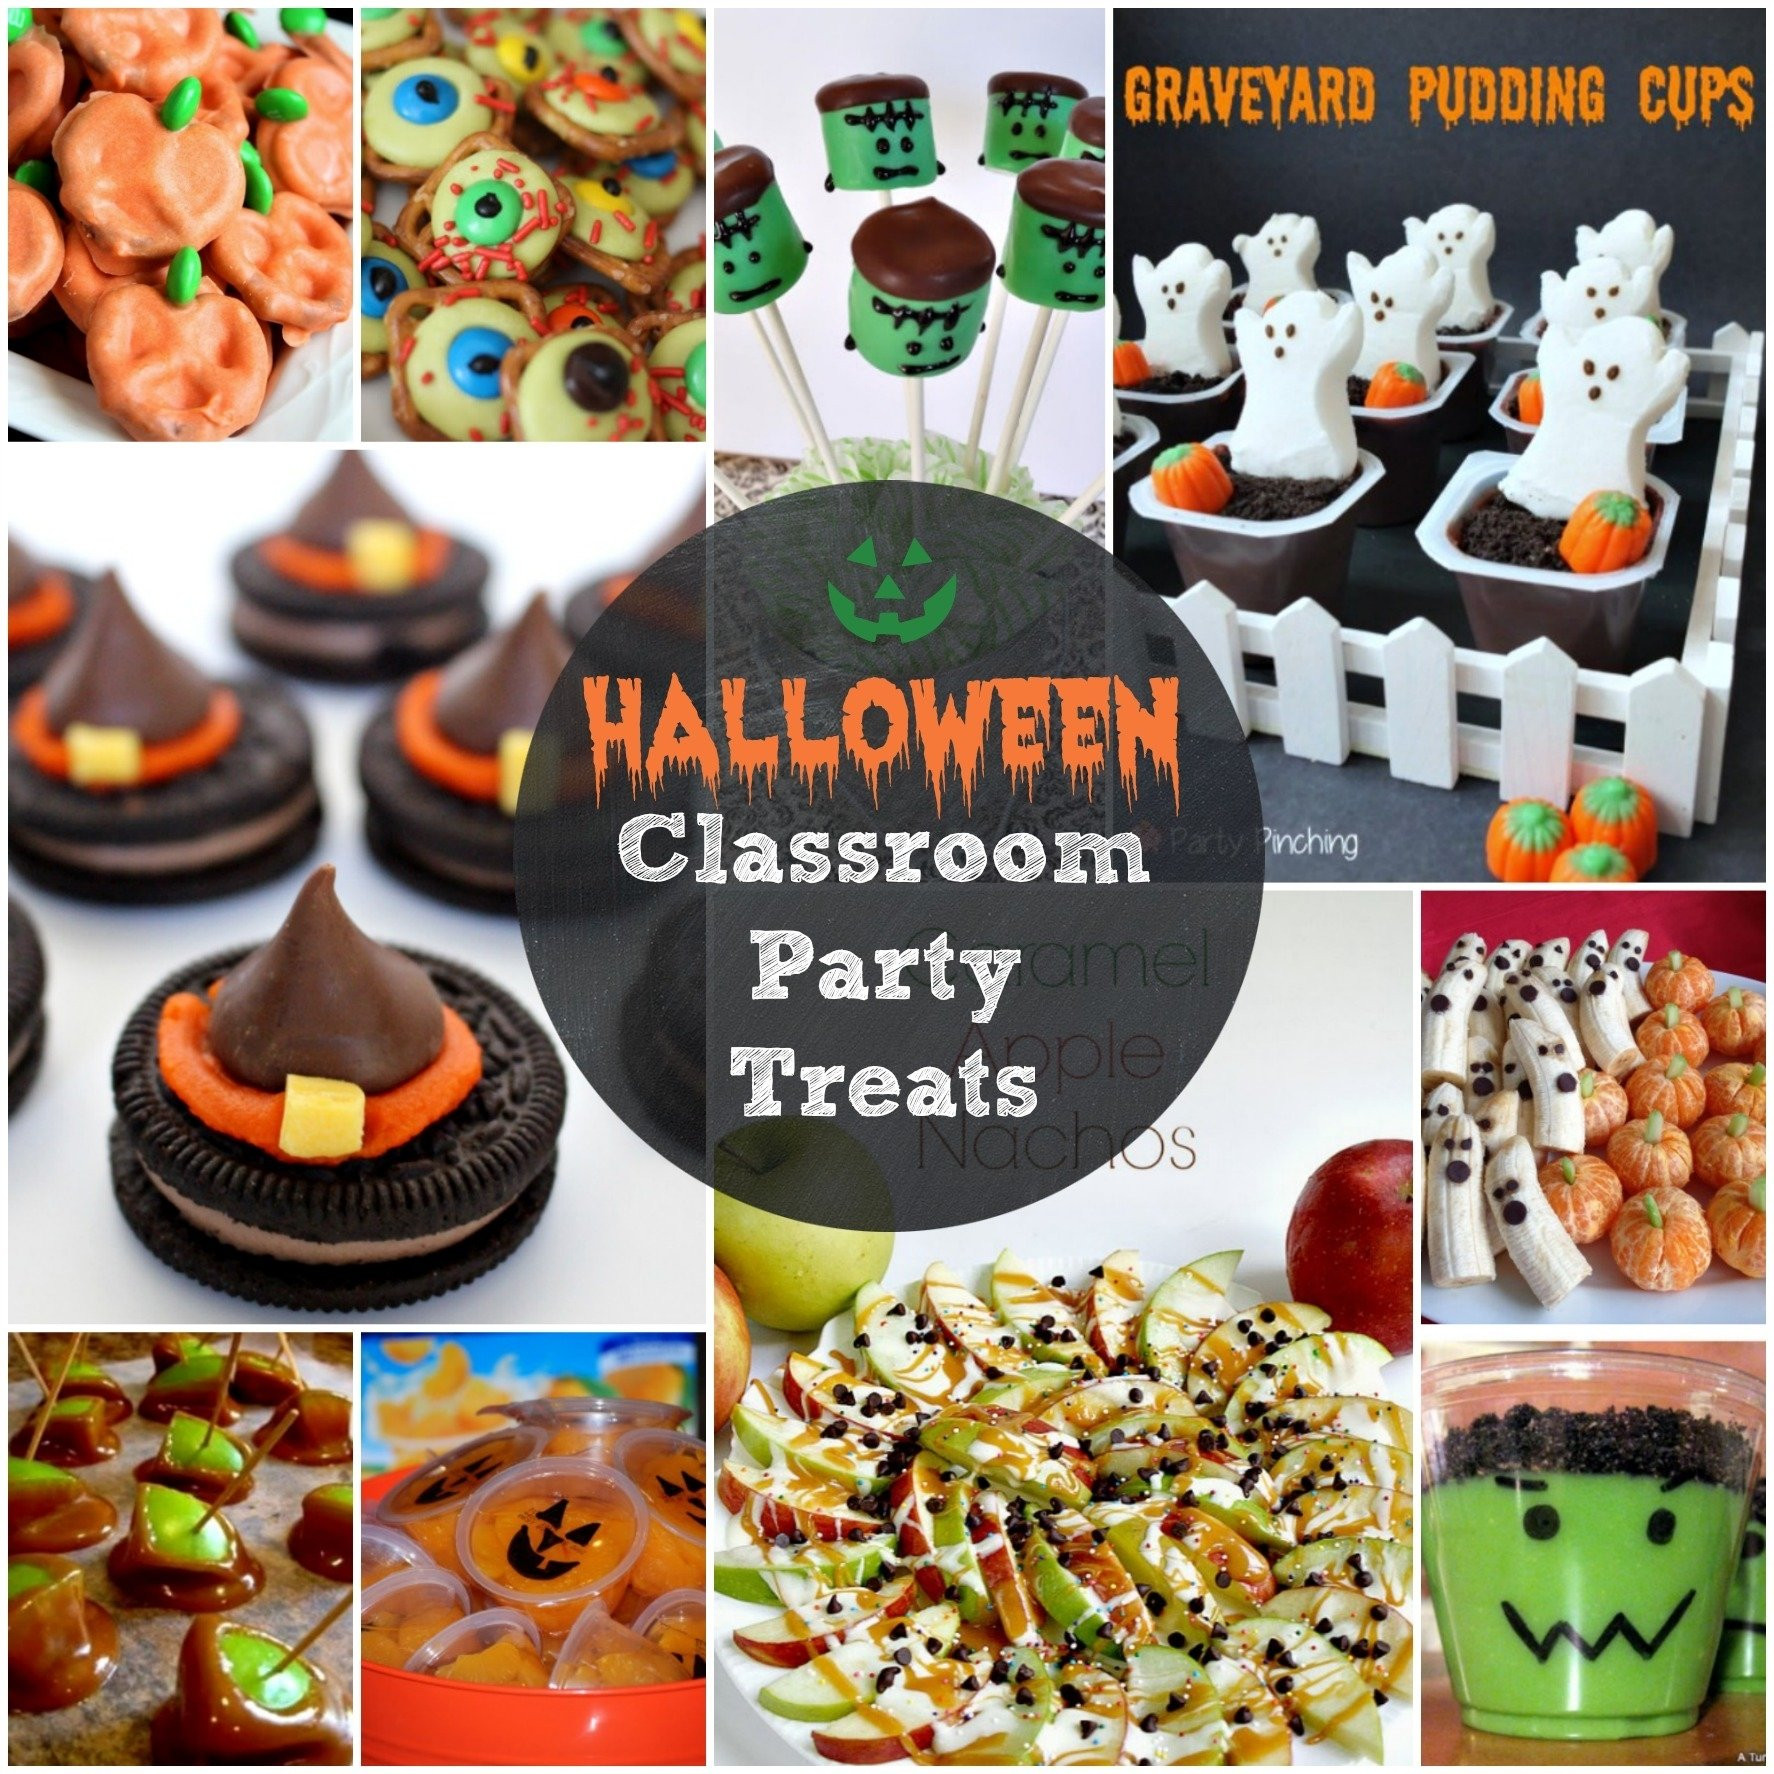 Ideas For A Halloween Party
 10 Unique Halloween Treat Ideas For School Parties 2019